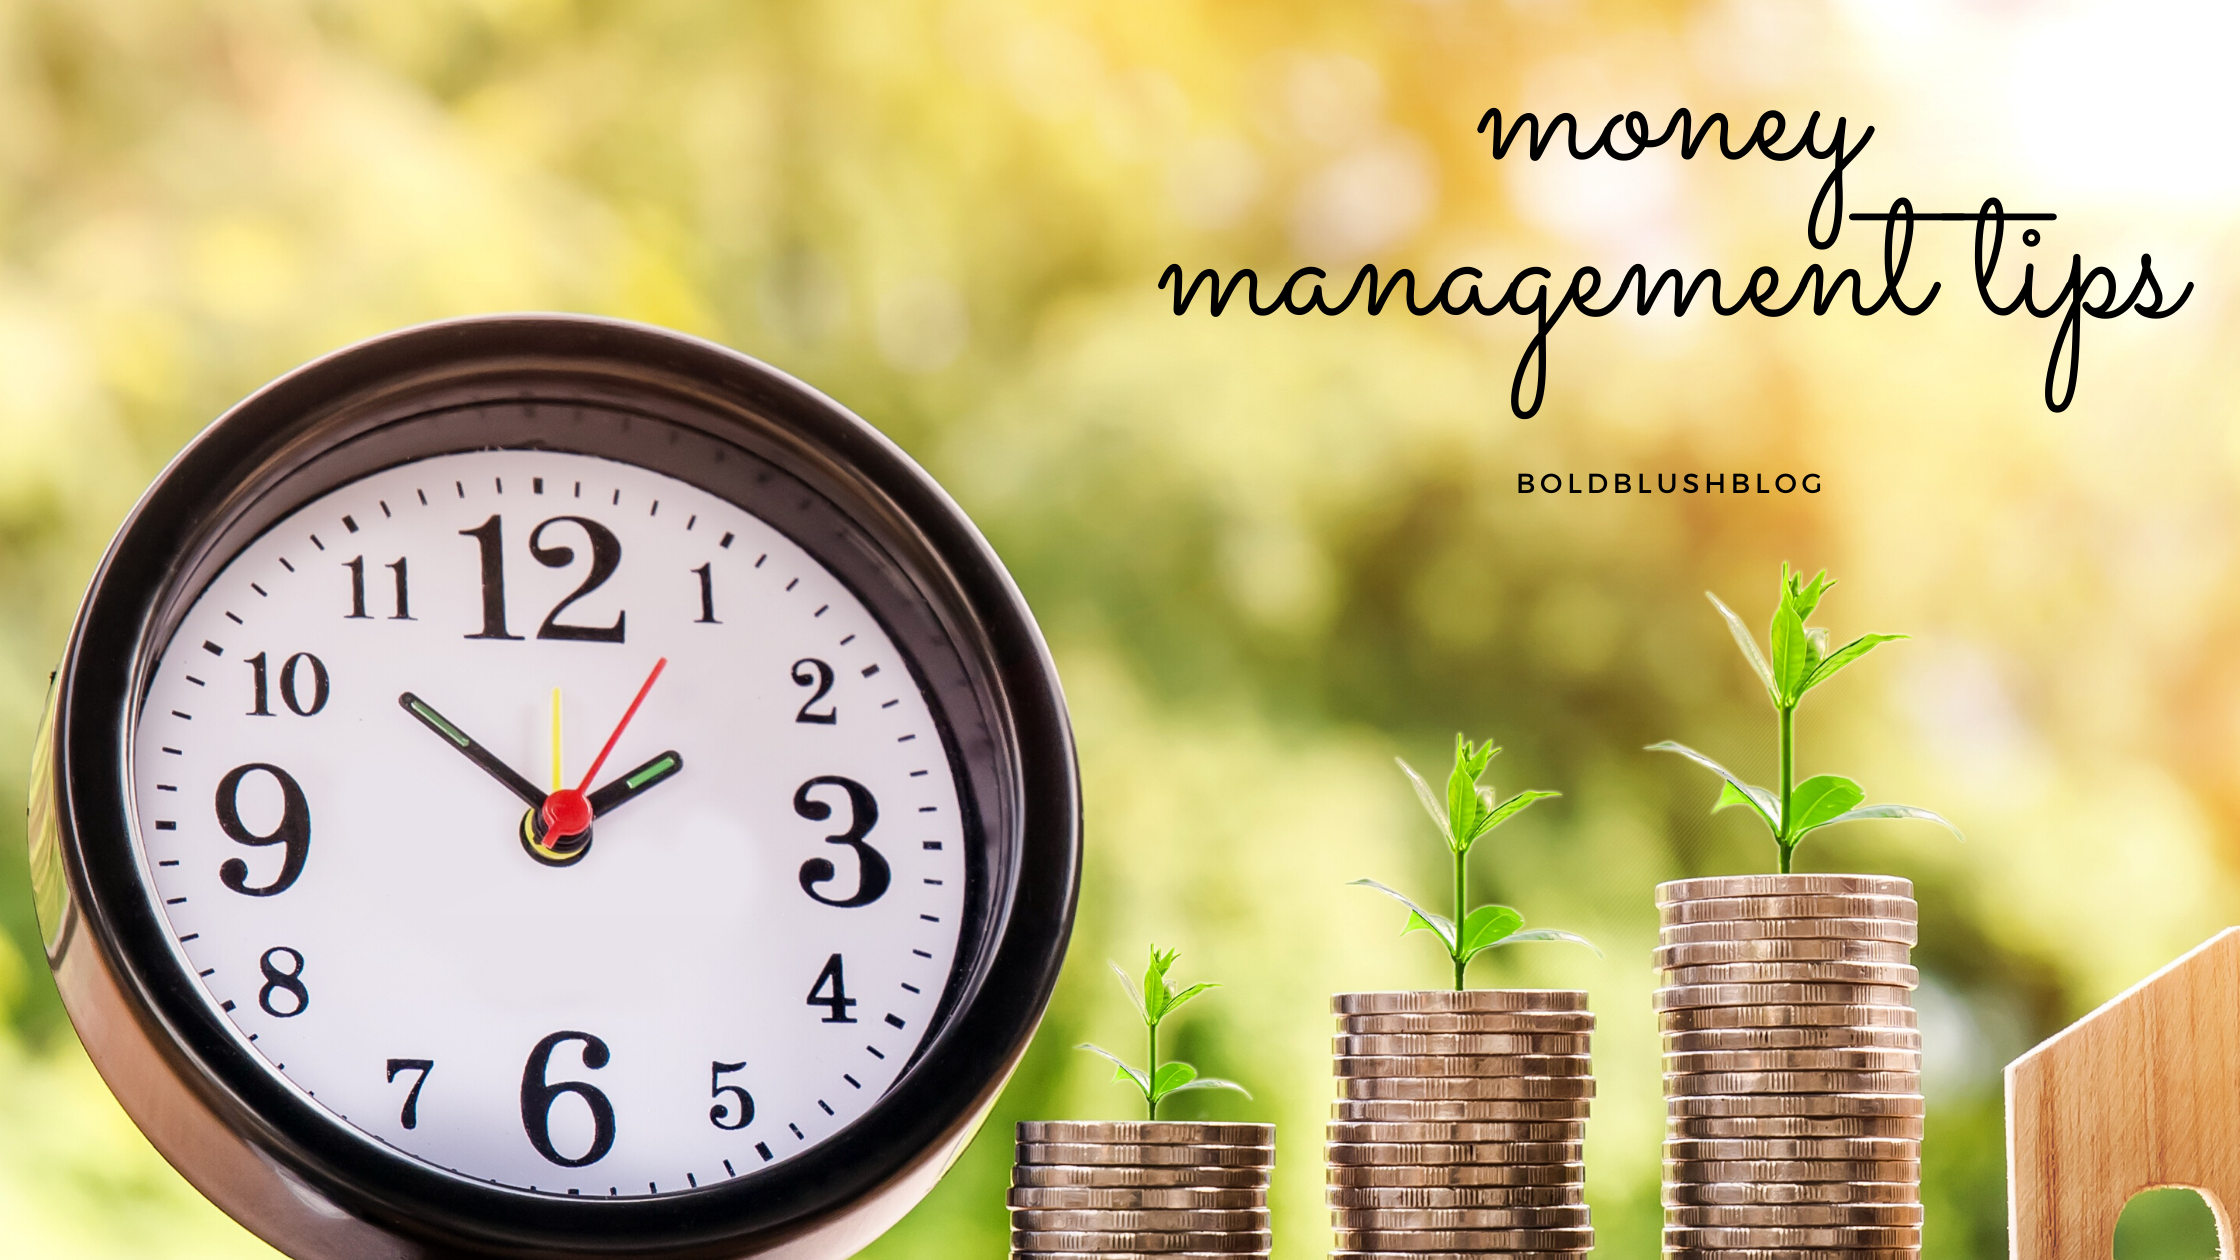 What is the most important tip about managing money?